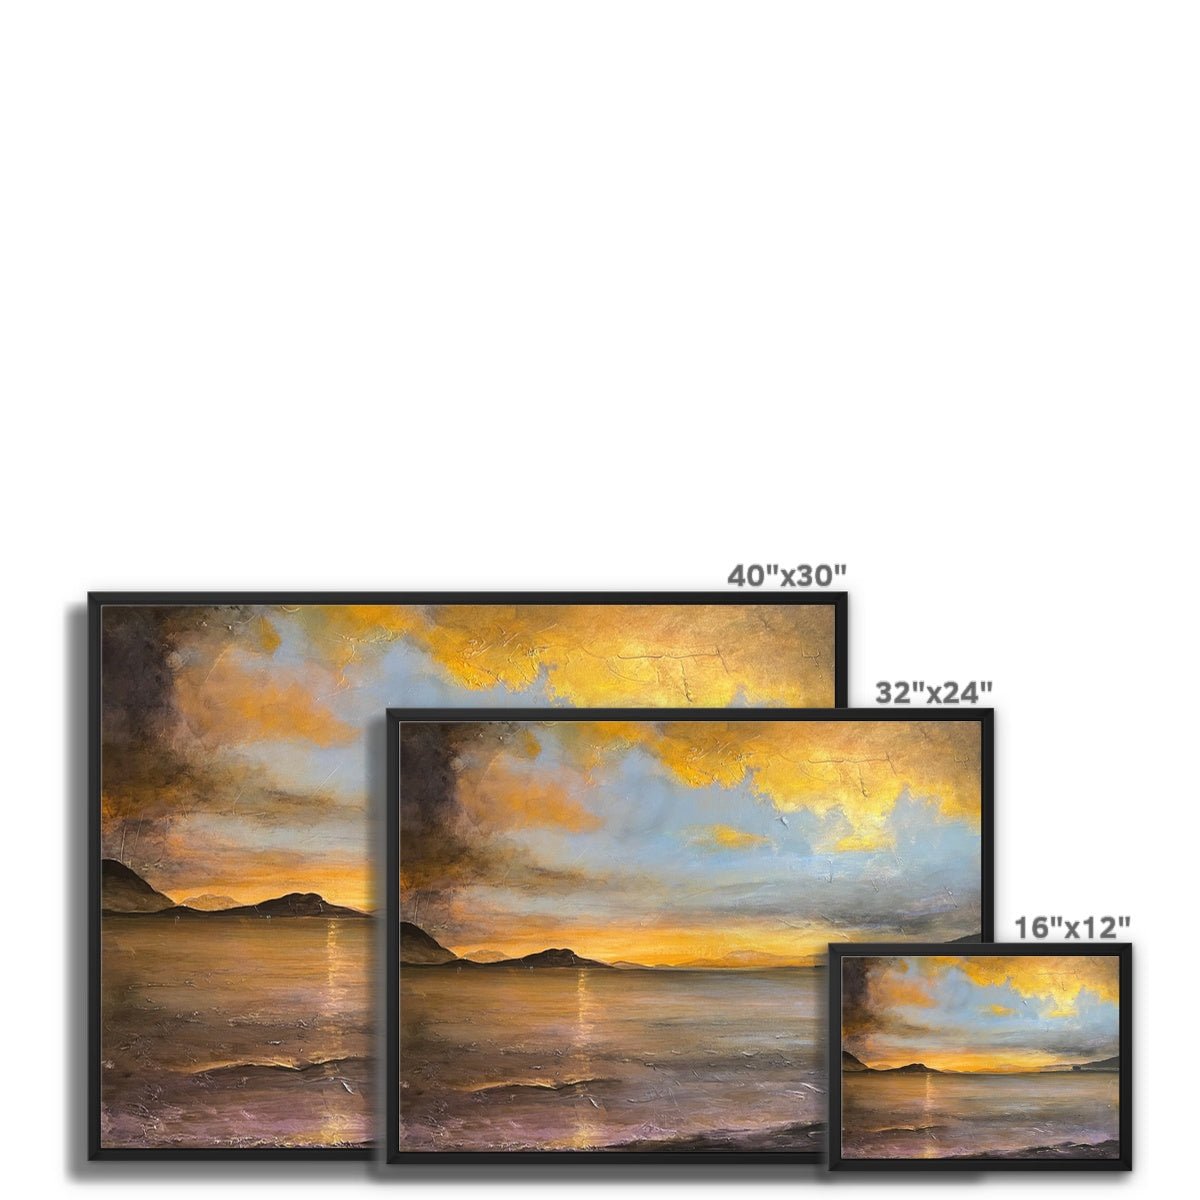 Loch Linnhe Sunset Painting | Framed Canvas From Scotland-Floating Framed Canvas Prints-Scottish Lochs & Mountains Art Gallery-Paintings, Prints, Homeware, Art Gifts From Scotland By Scottish Artist Kevin Hunter